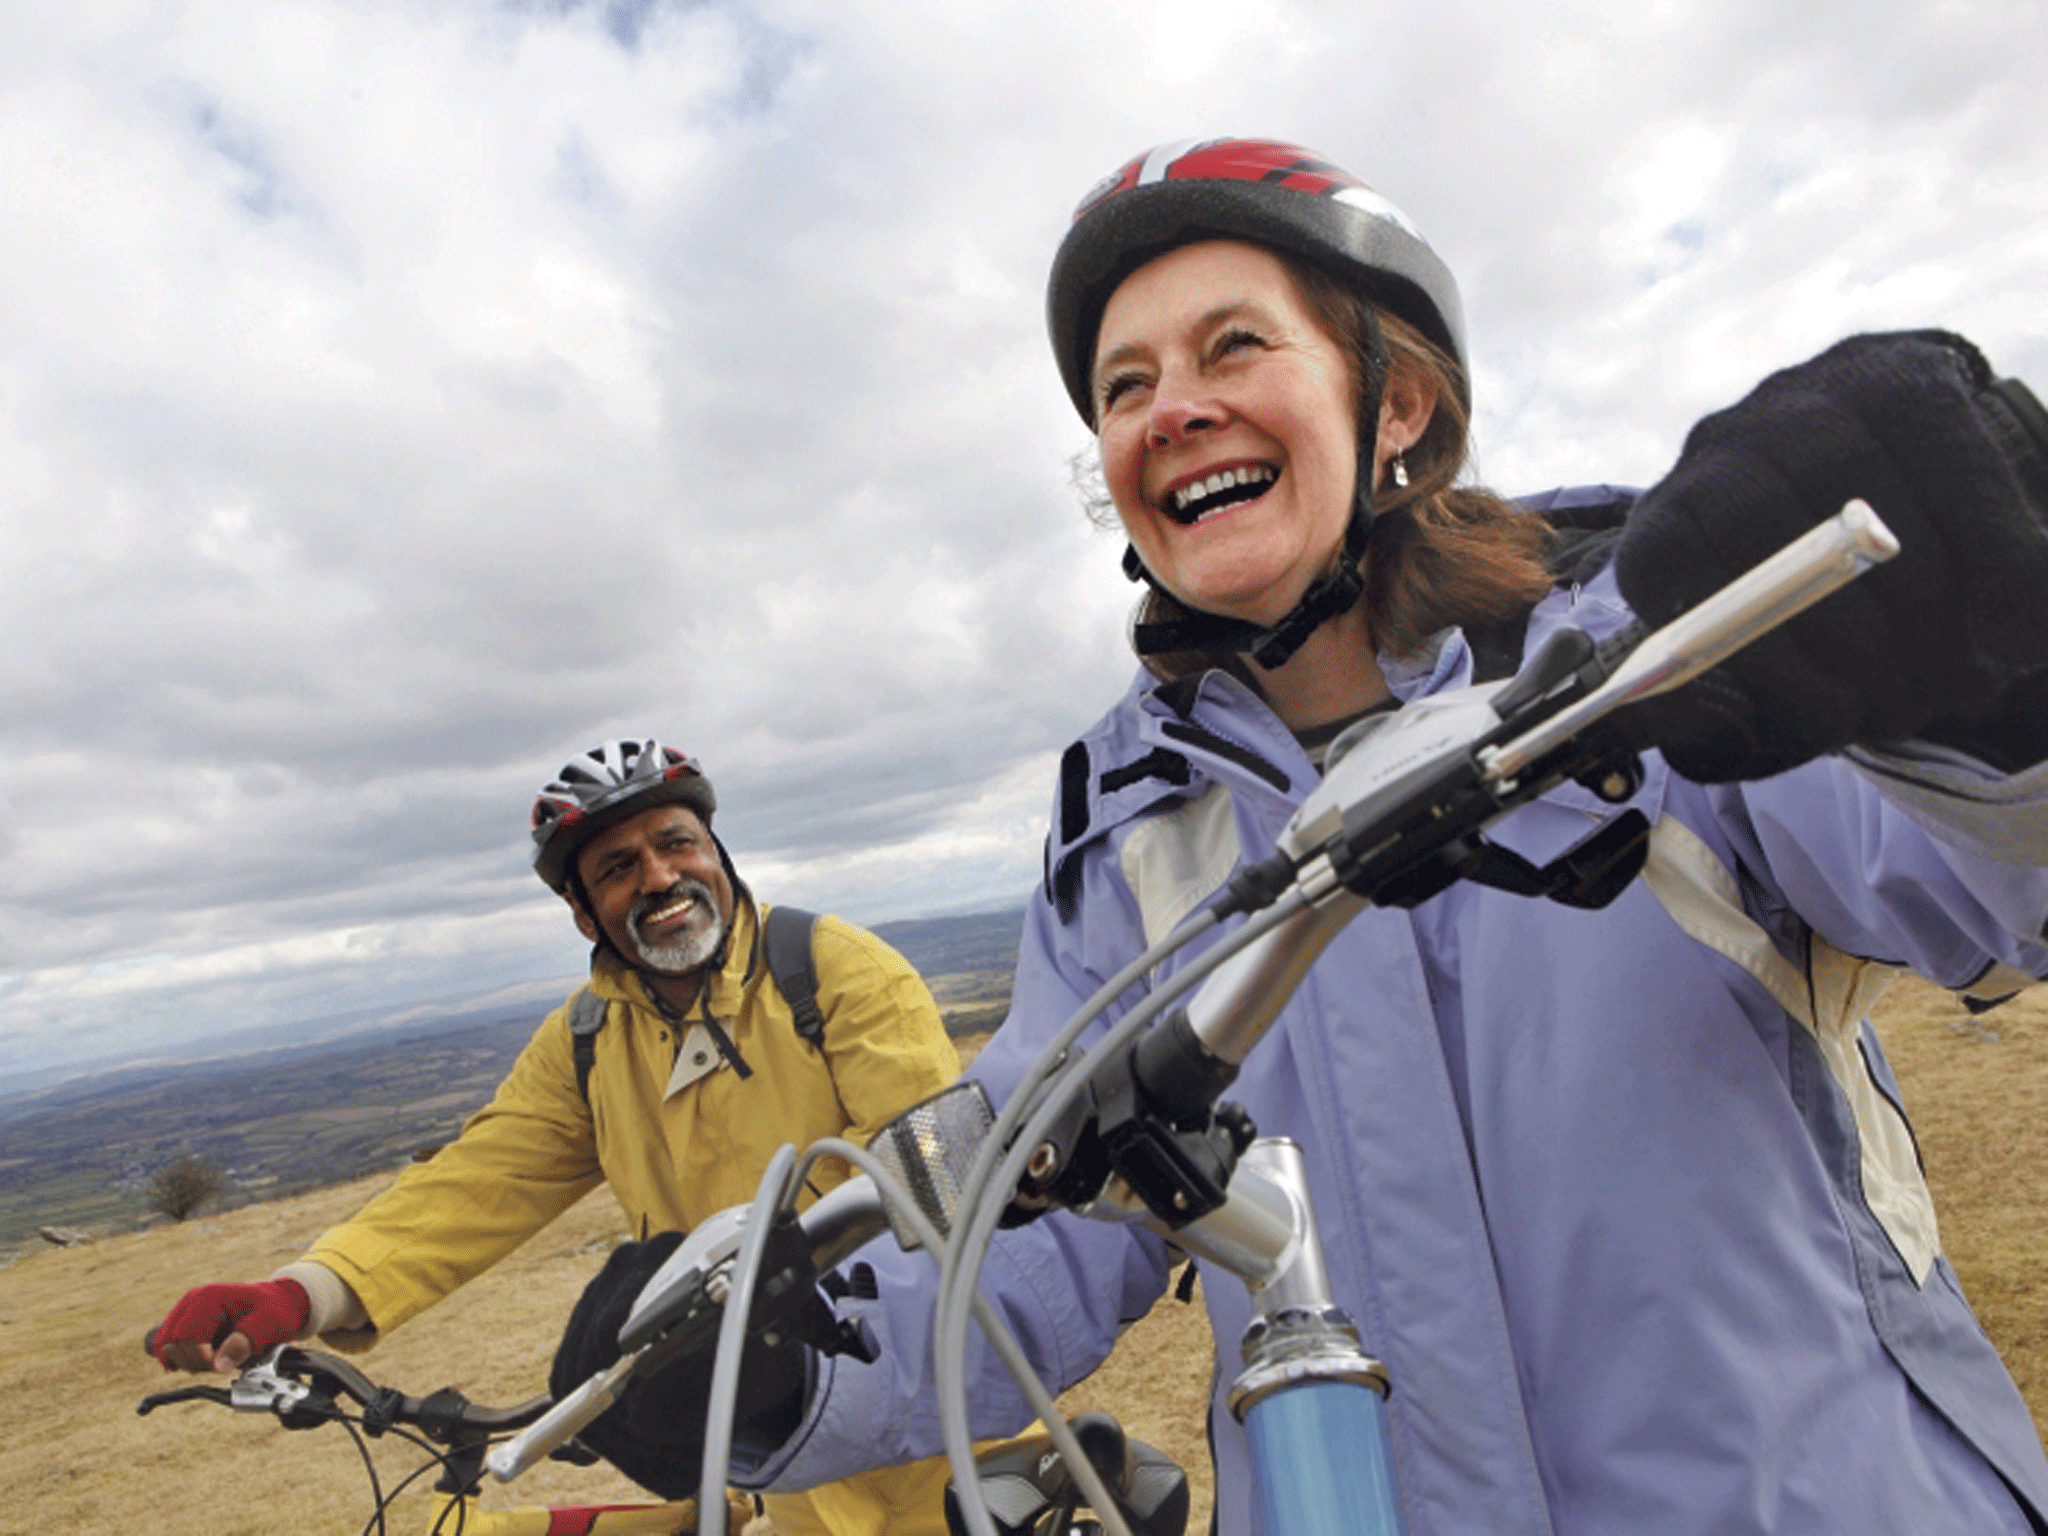 Feel-good factor: cycling can help beat depression